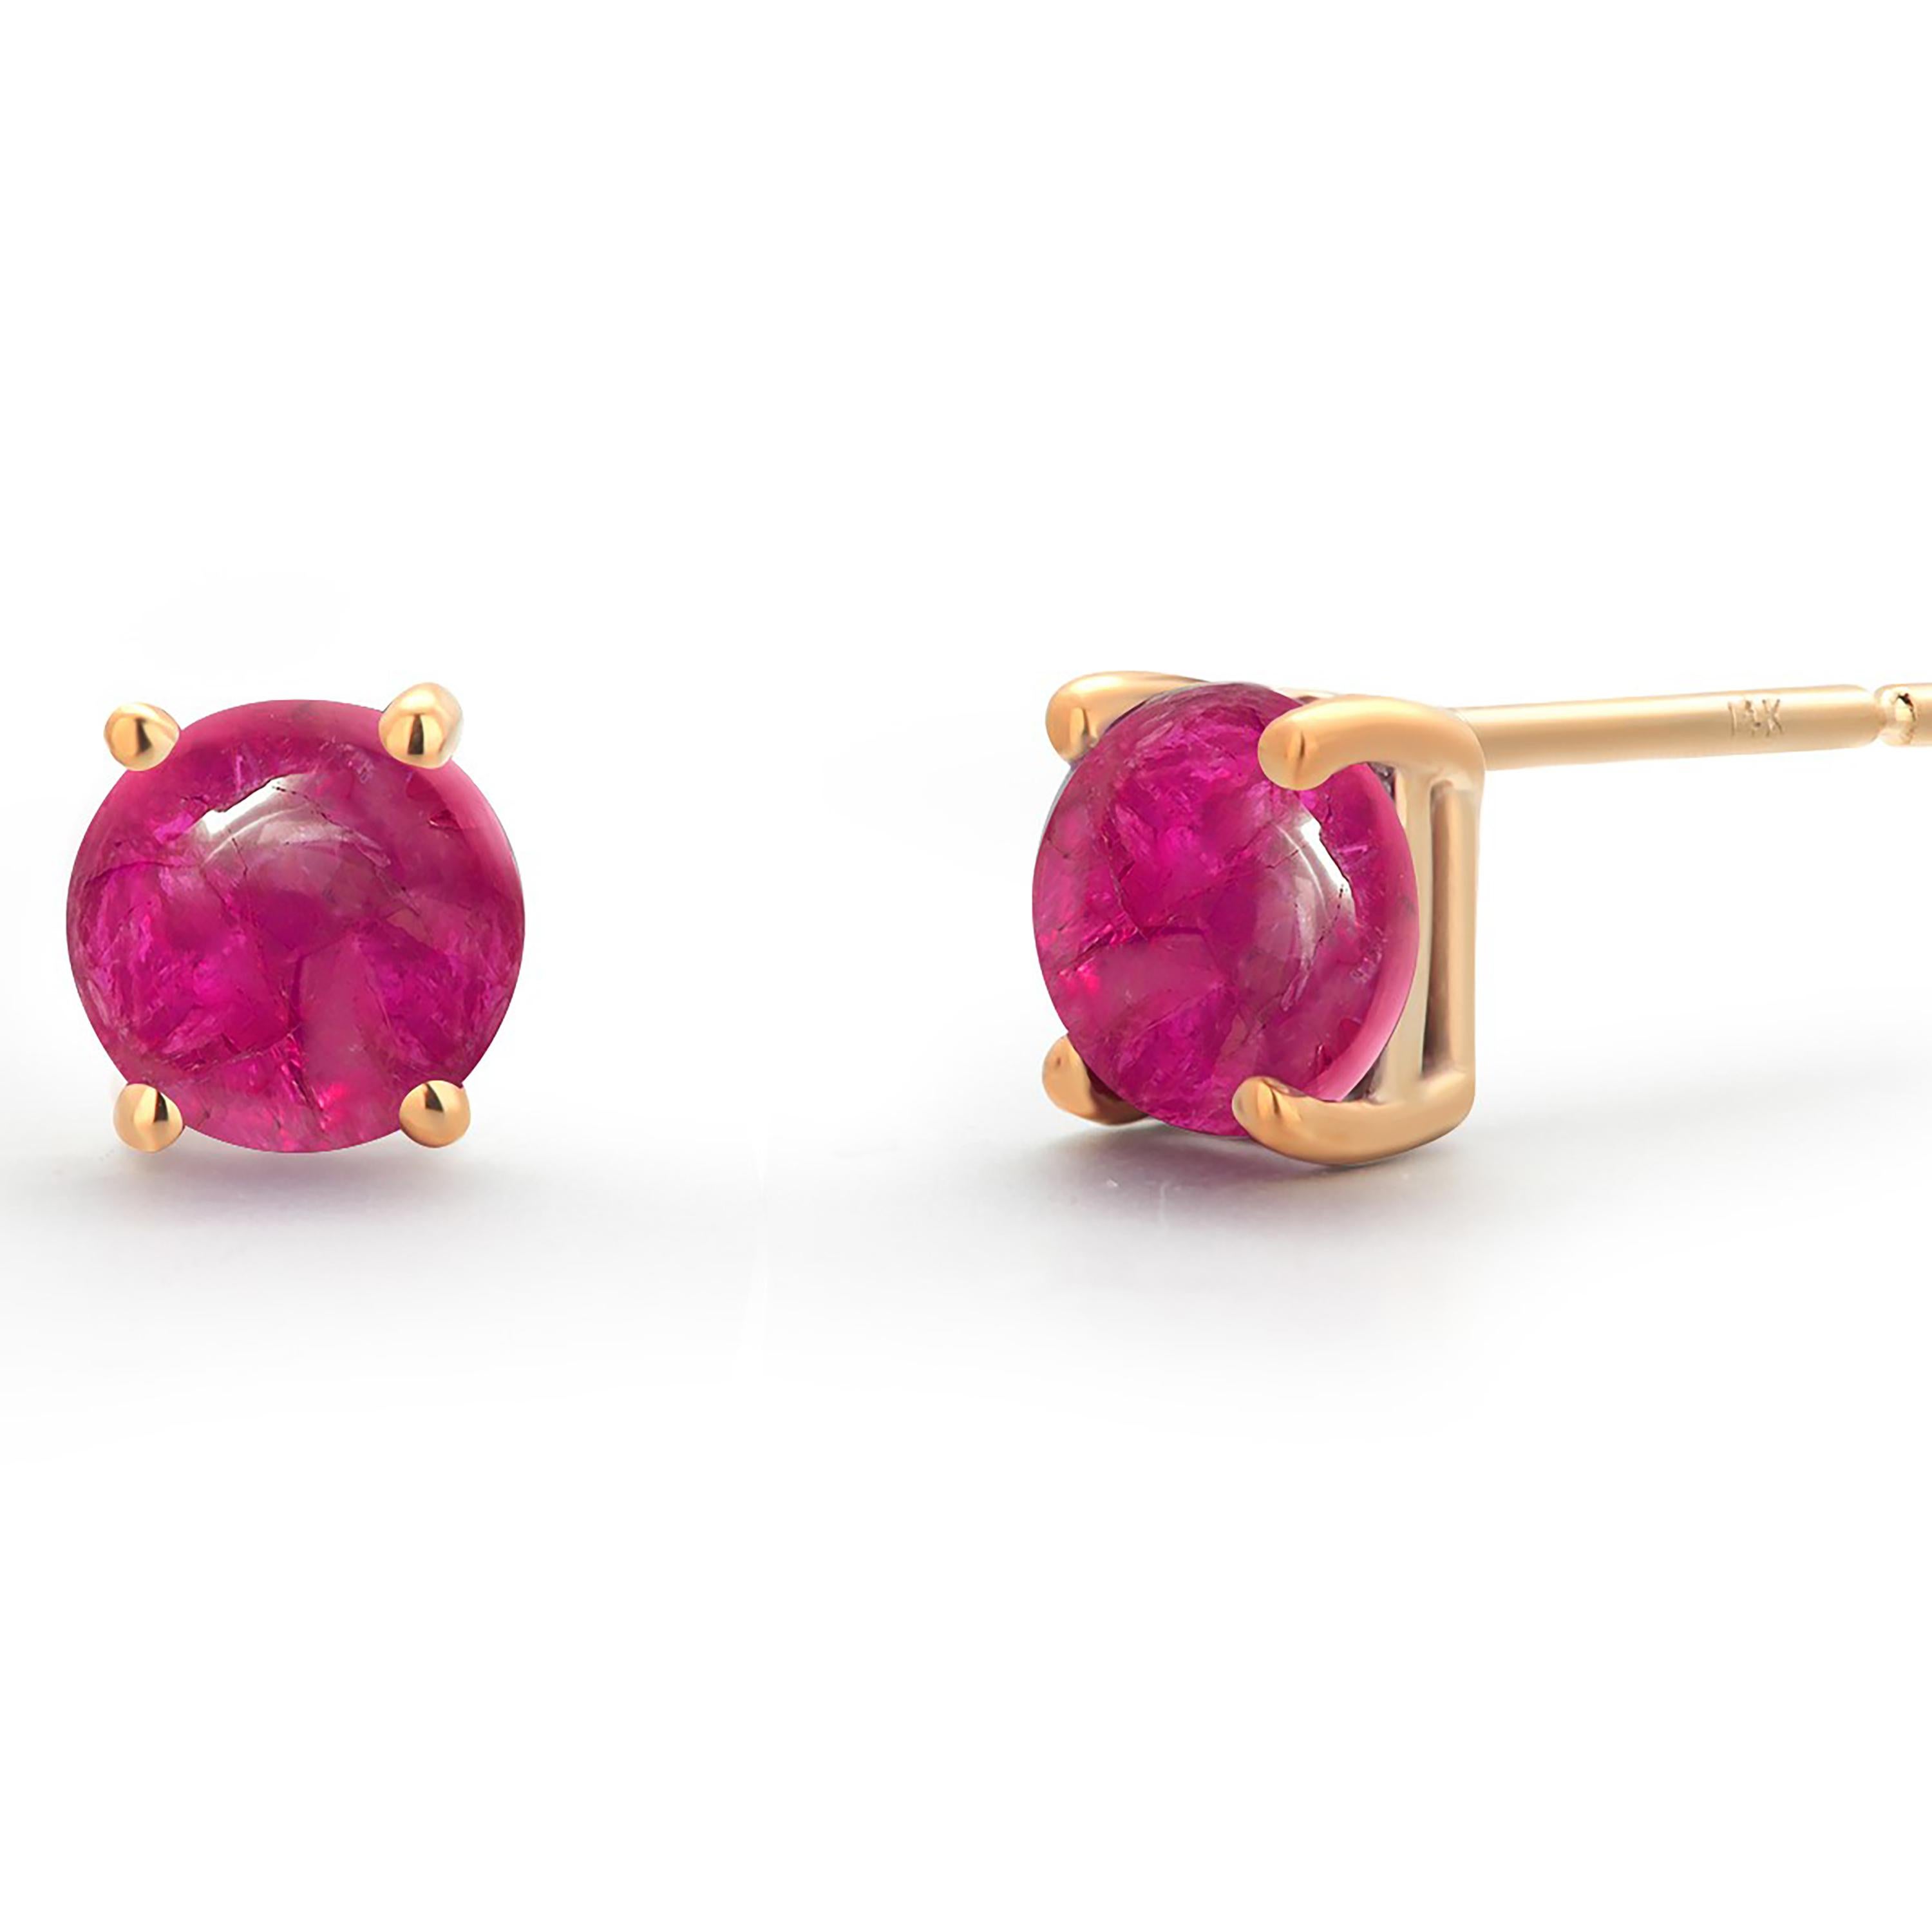 Round Cut Two Matched Cabochon Rubies Weighing 1.65 Carat 0.23 Inch Yellow Gold Earrings